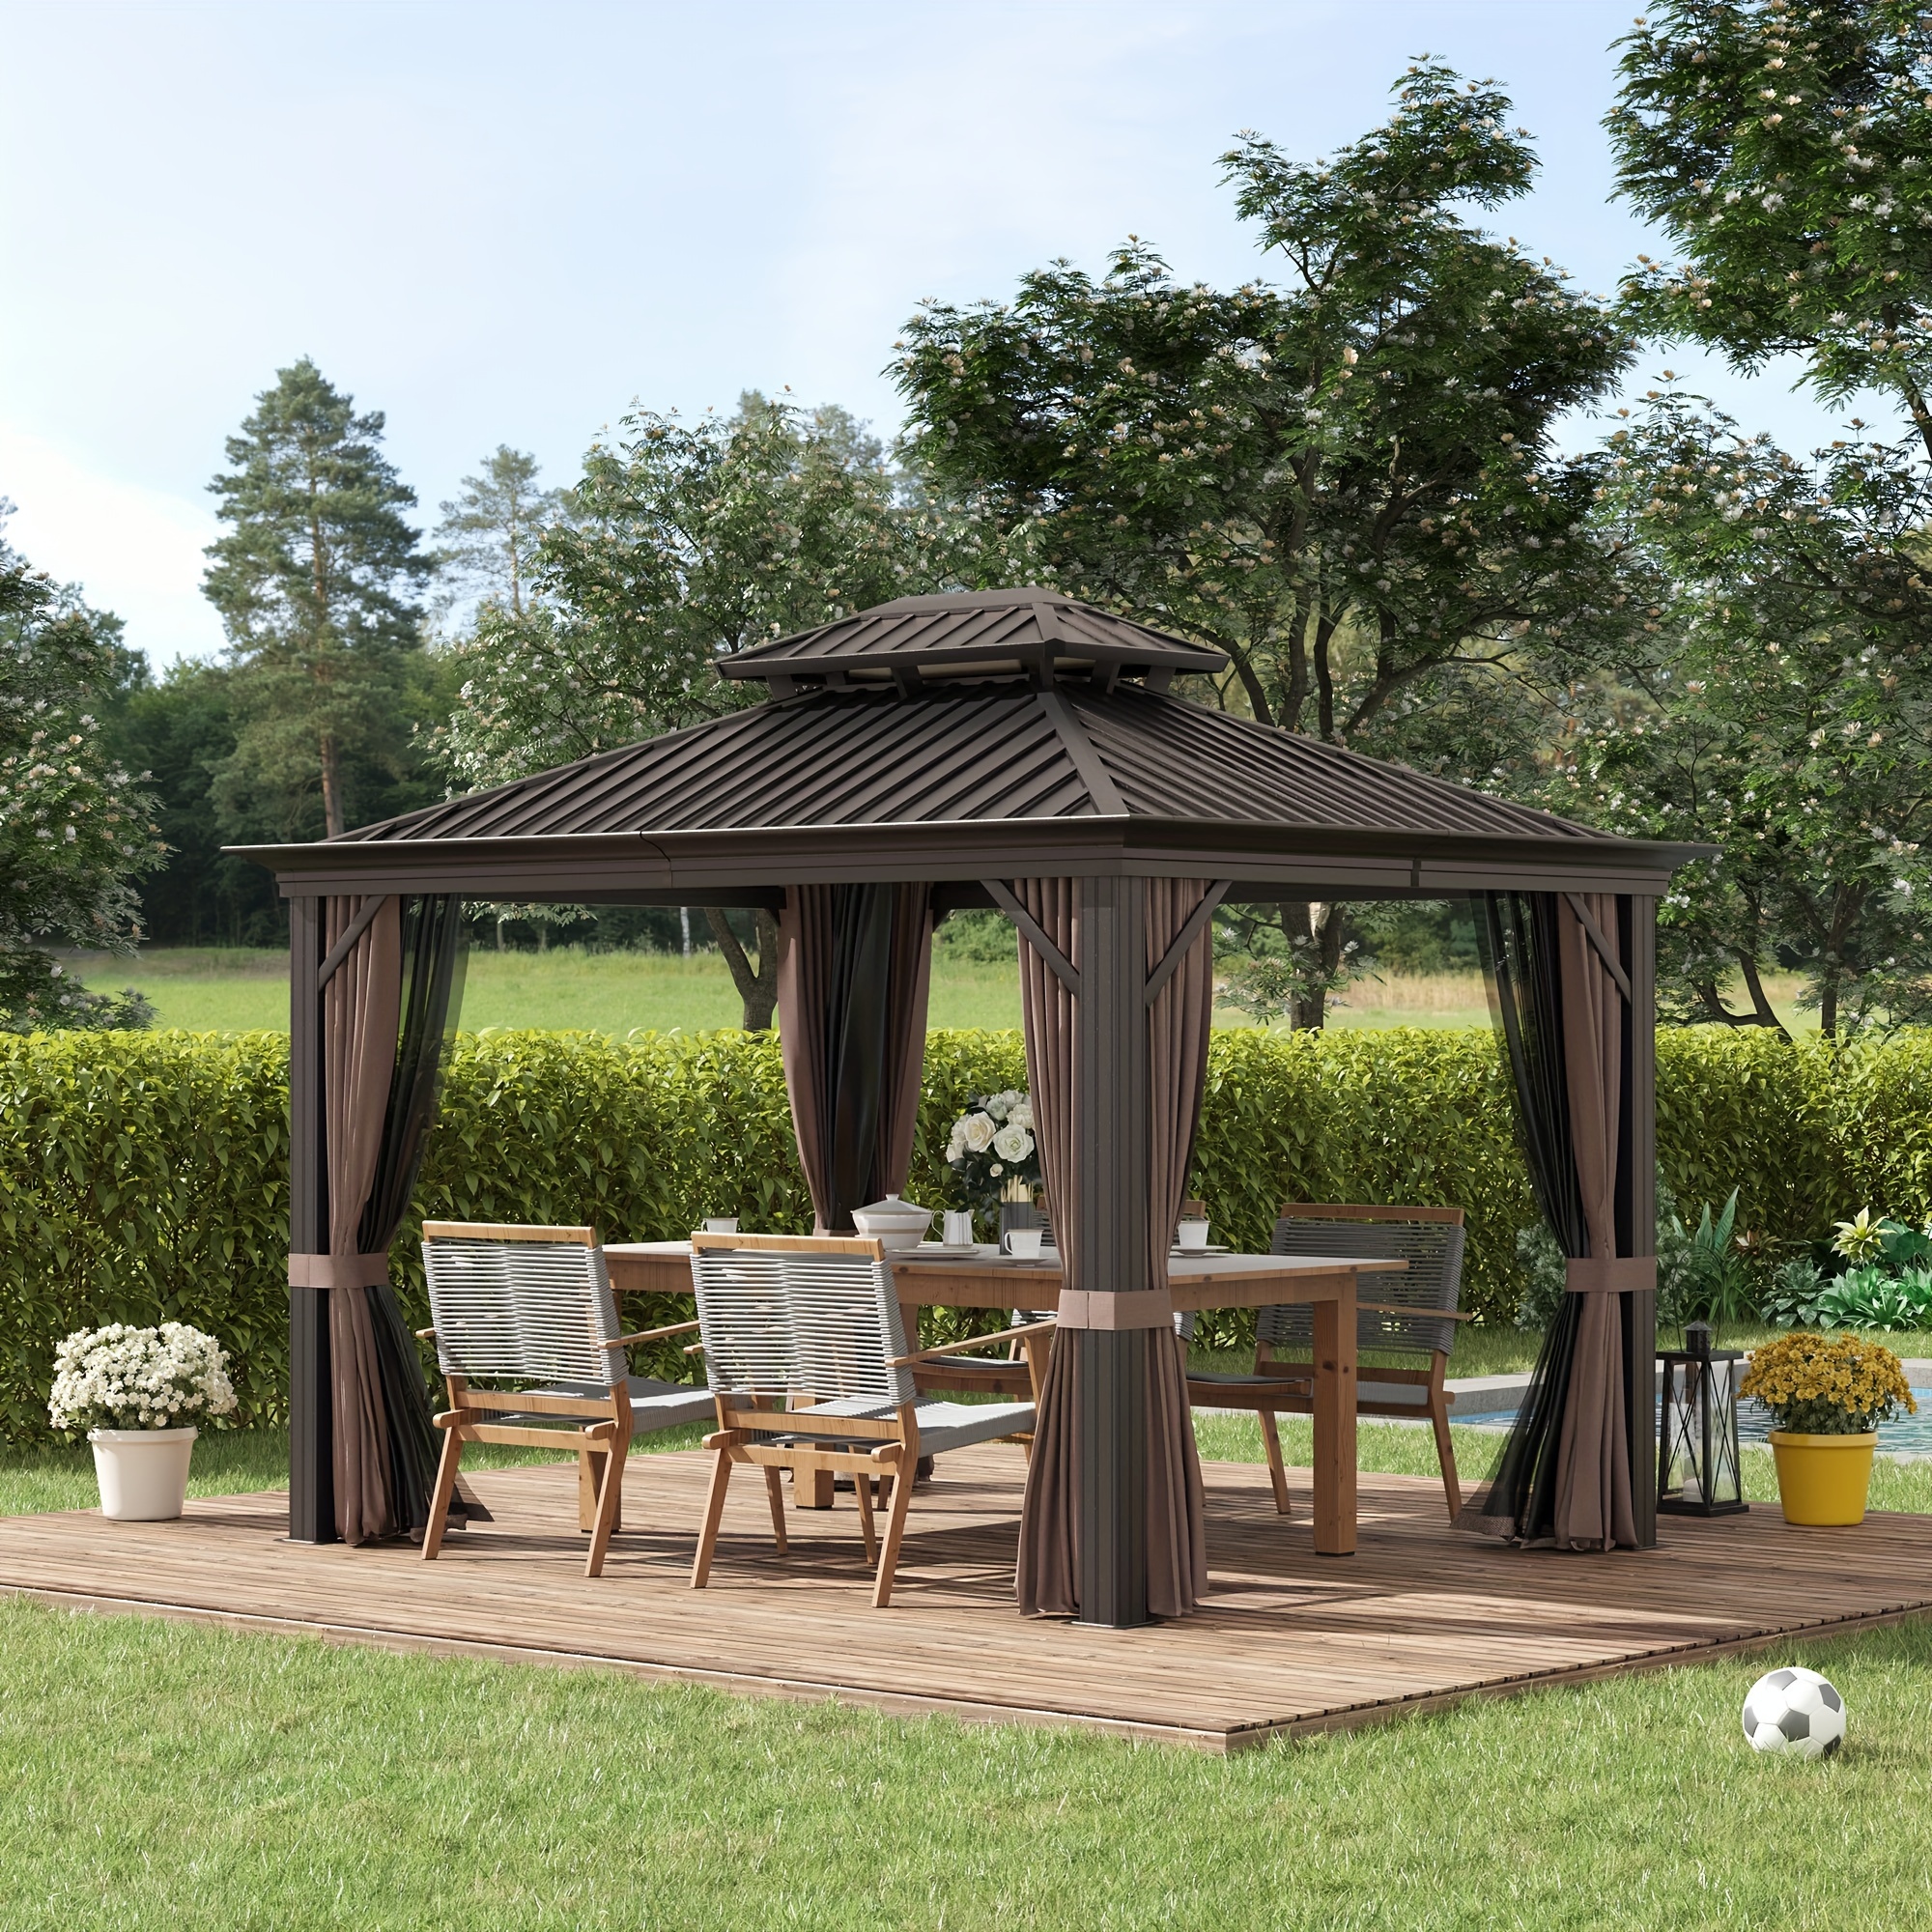 

Outsunny 10' X 12' Gazebo With Curtains And Netting, Permanent Pavilion Metal Double Roof Gazebo Canopy With Aluminum Frame And Hooks, For Garden, Patio, Backyard, Dark Brown